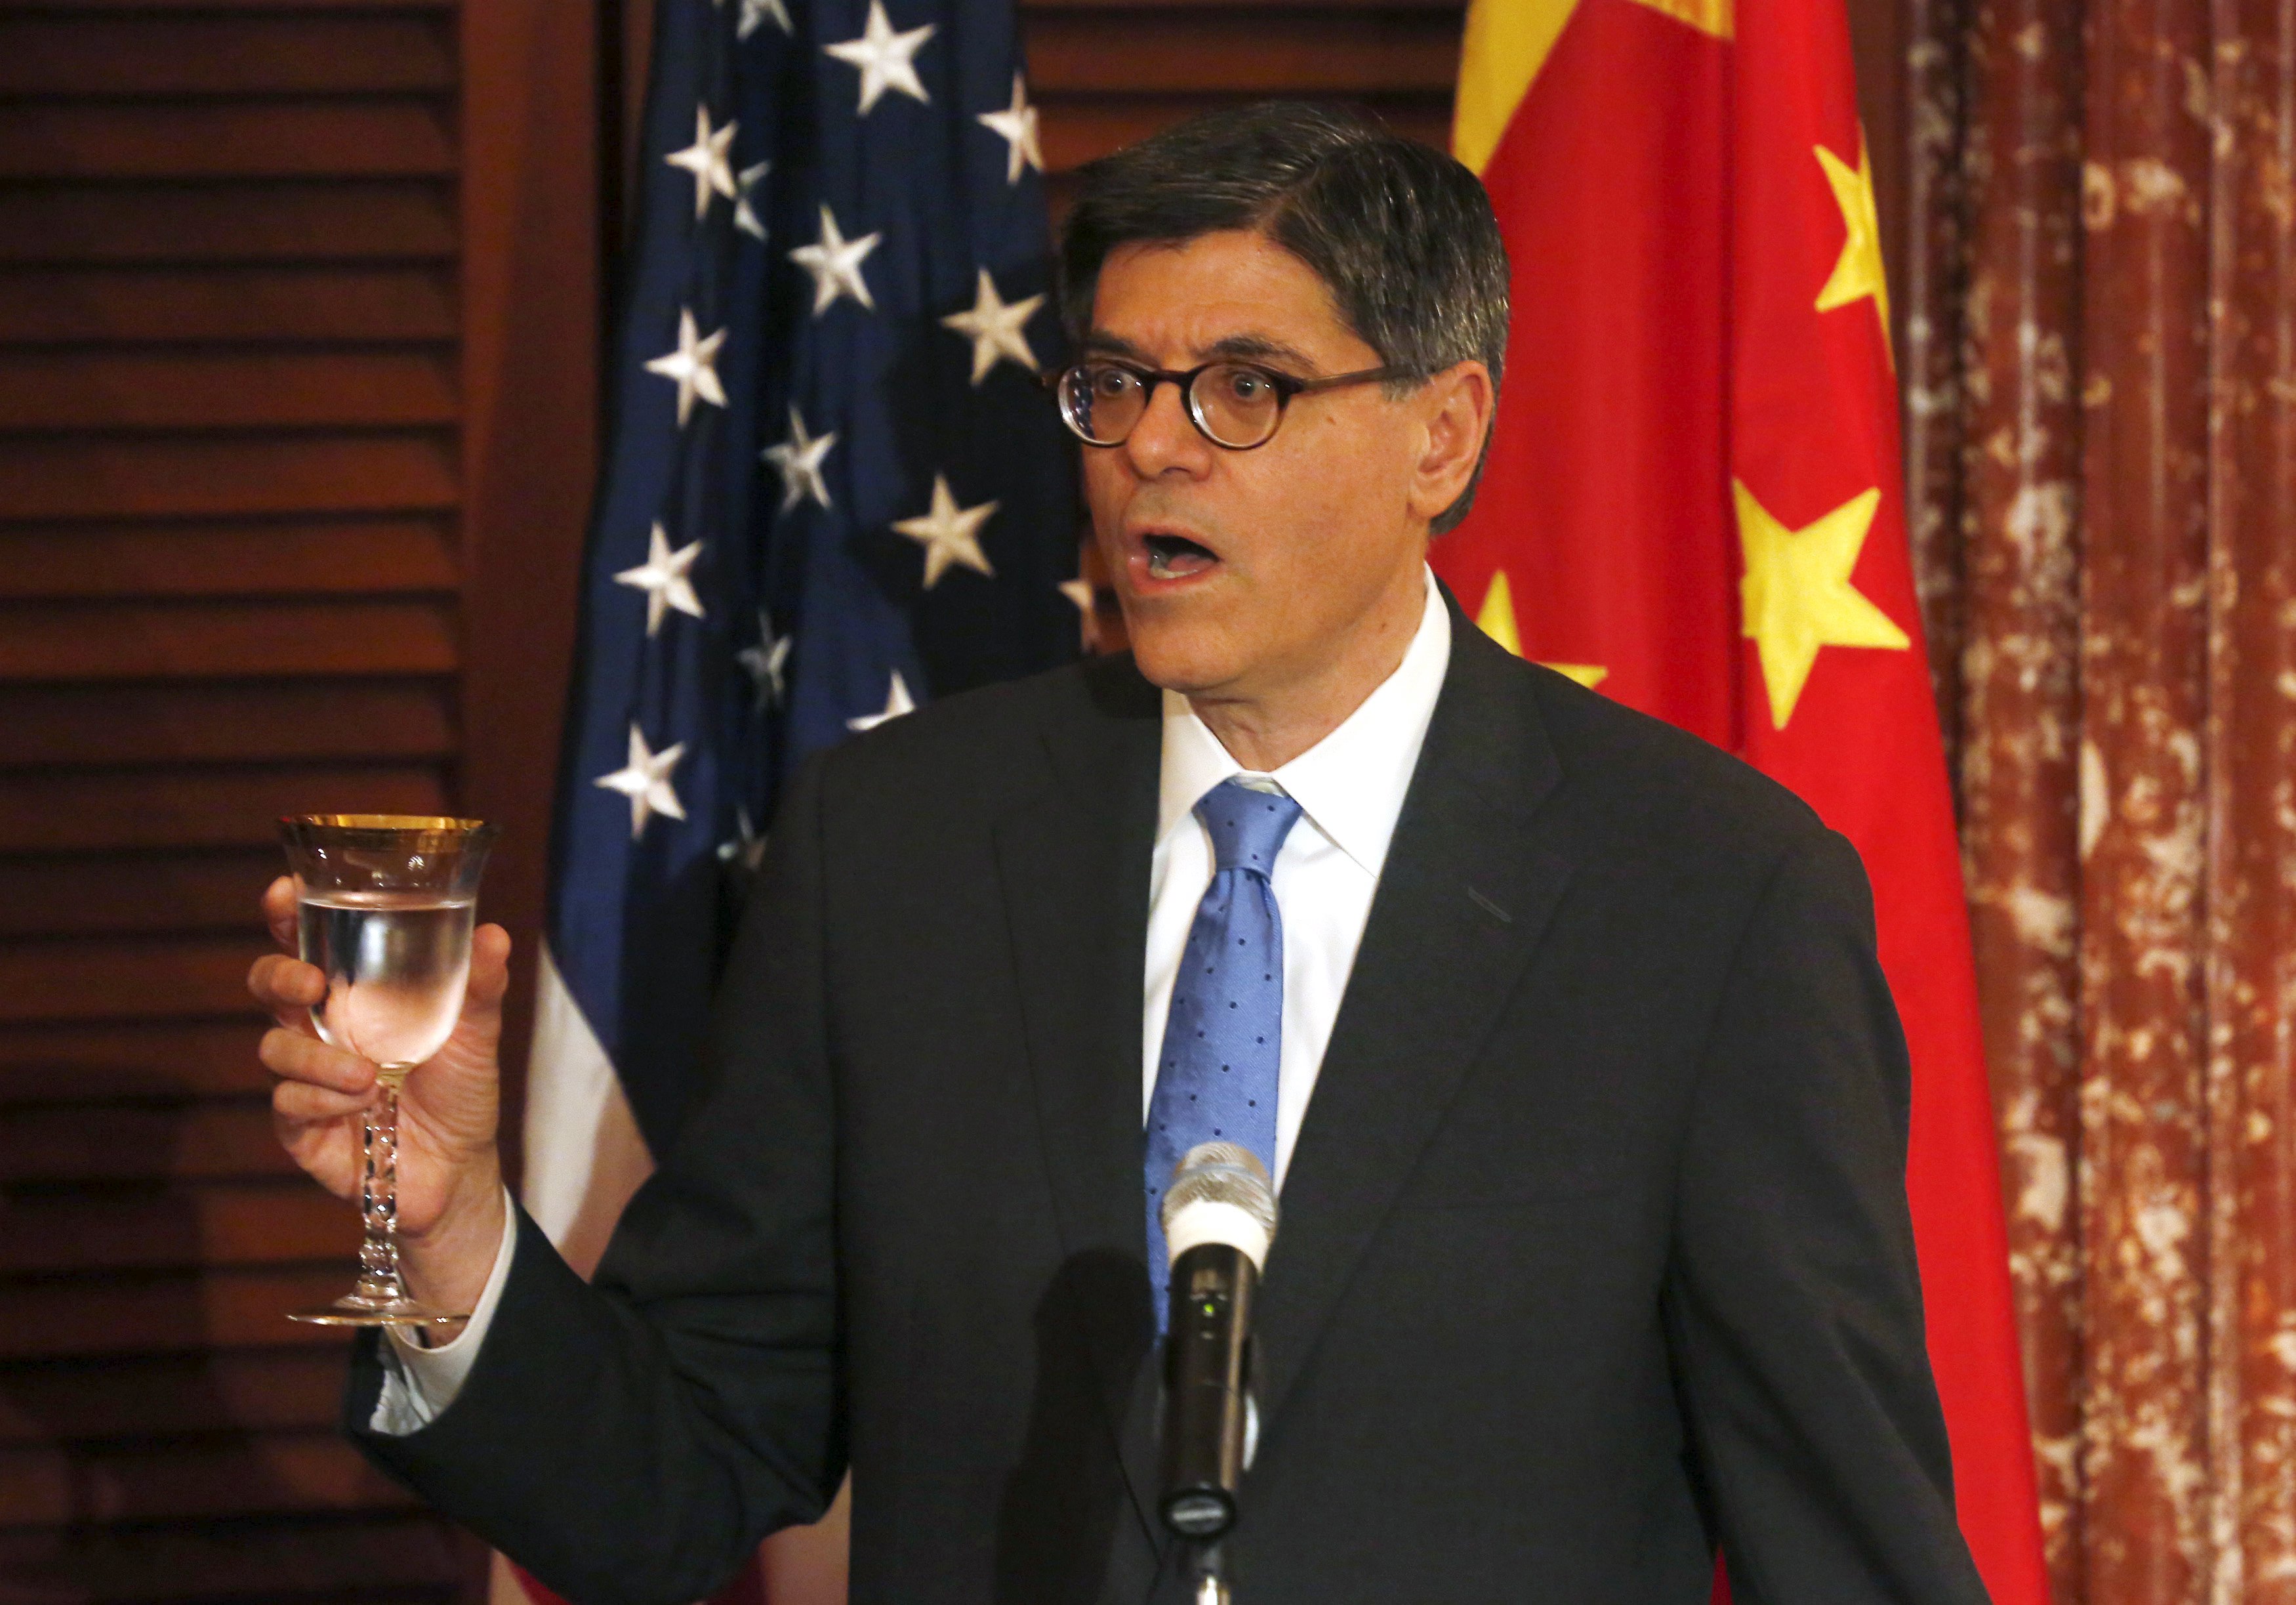 U.S. airs deep concerns over cyber security in China meetings